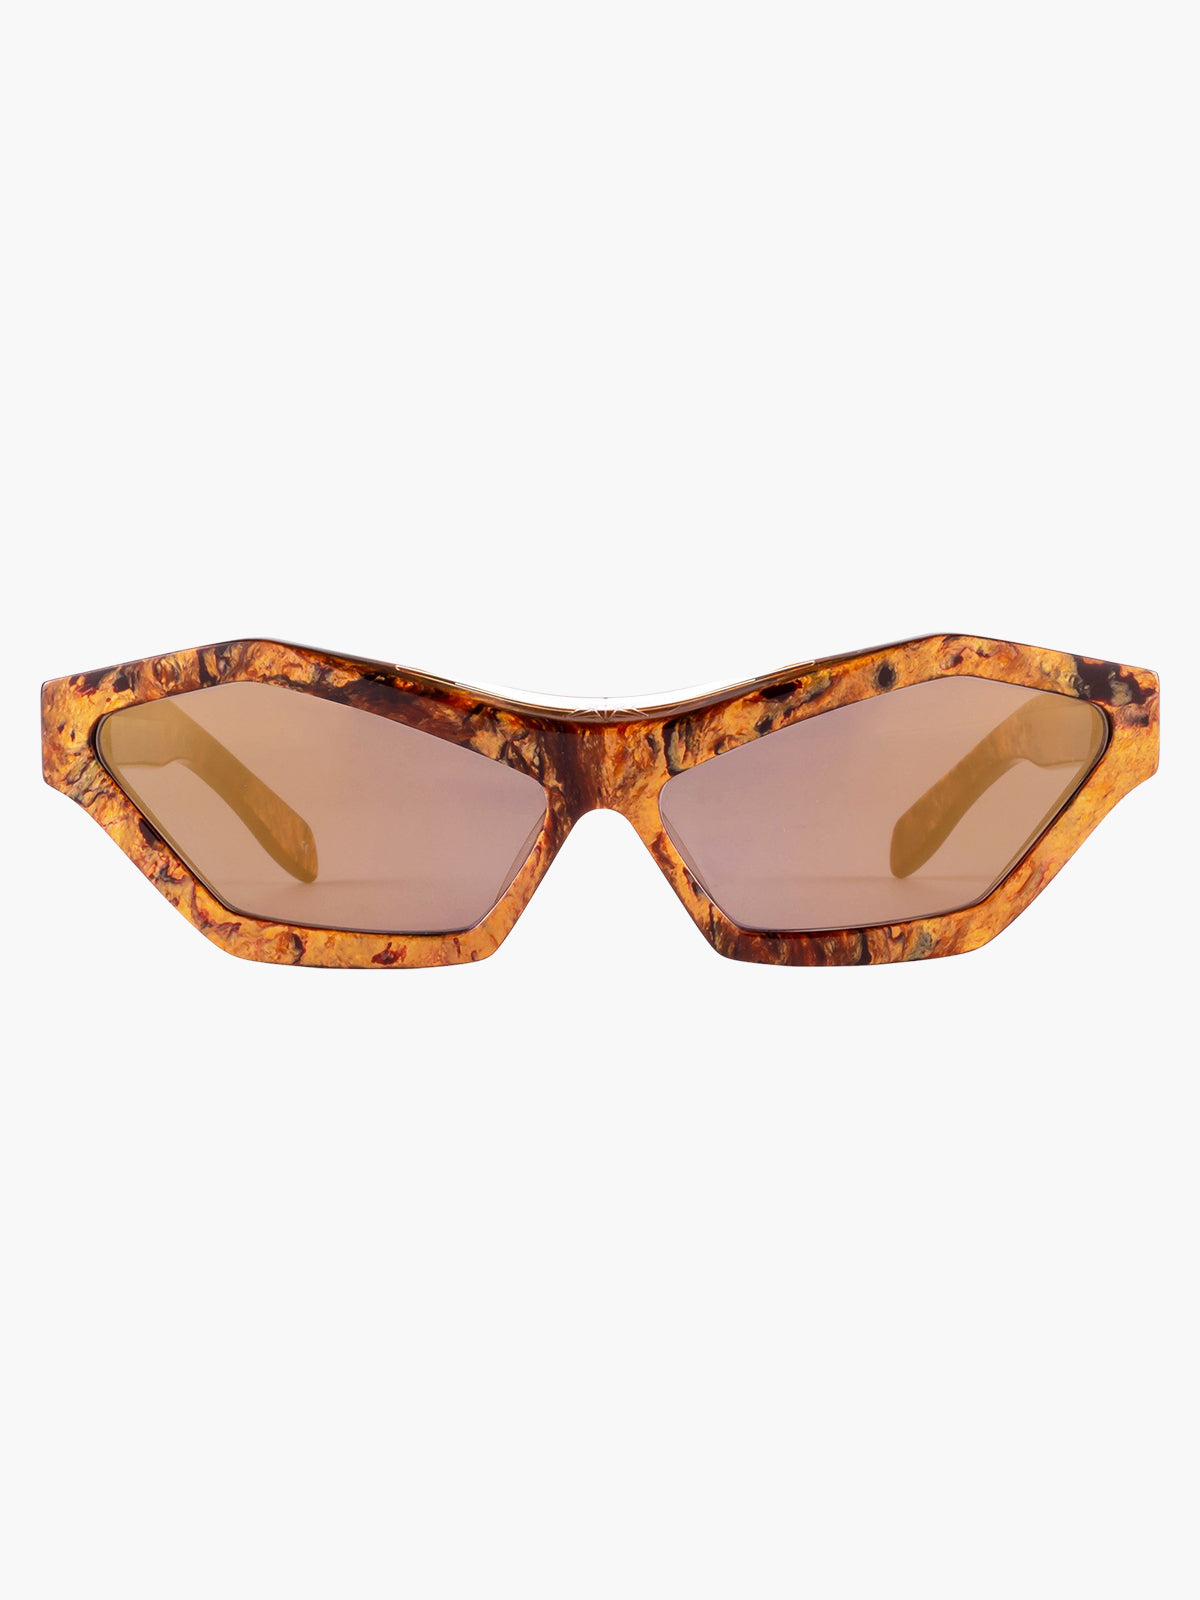 Solitaire 08 | Polished Bronze/Muted Gold Mirror Lens